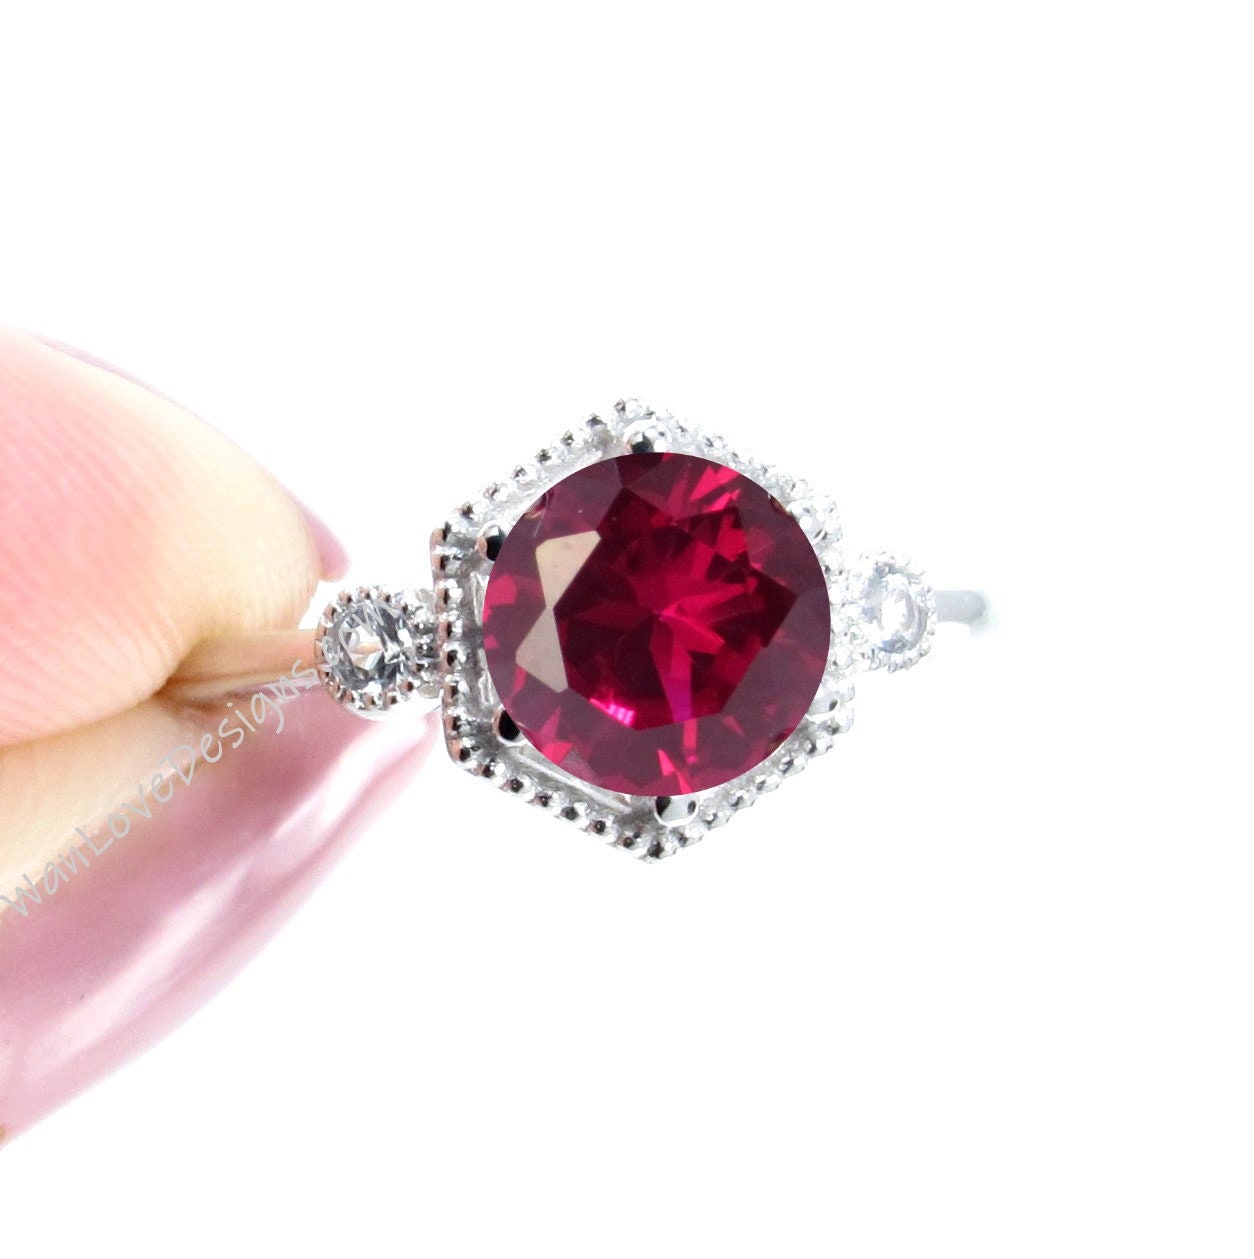 Round Ruby Ring, Hexagon Ruby Engagement Ring, Red Engagement Ring, Round Milrgain Bezel Diamond Ring Wan Love Designs